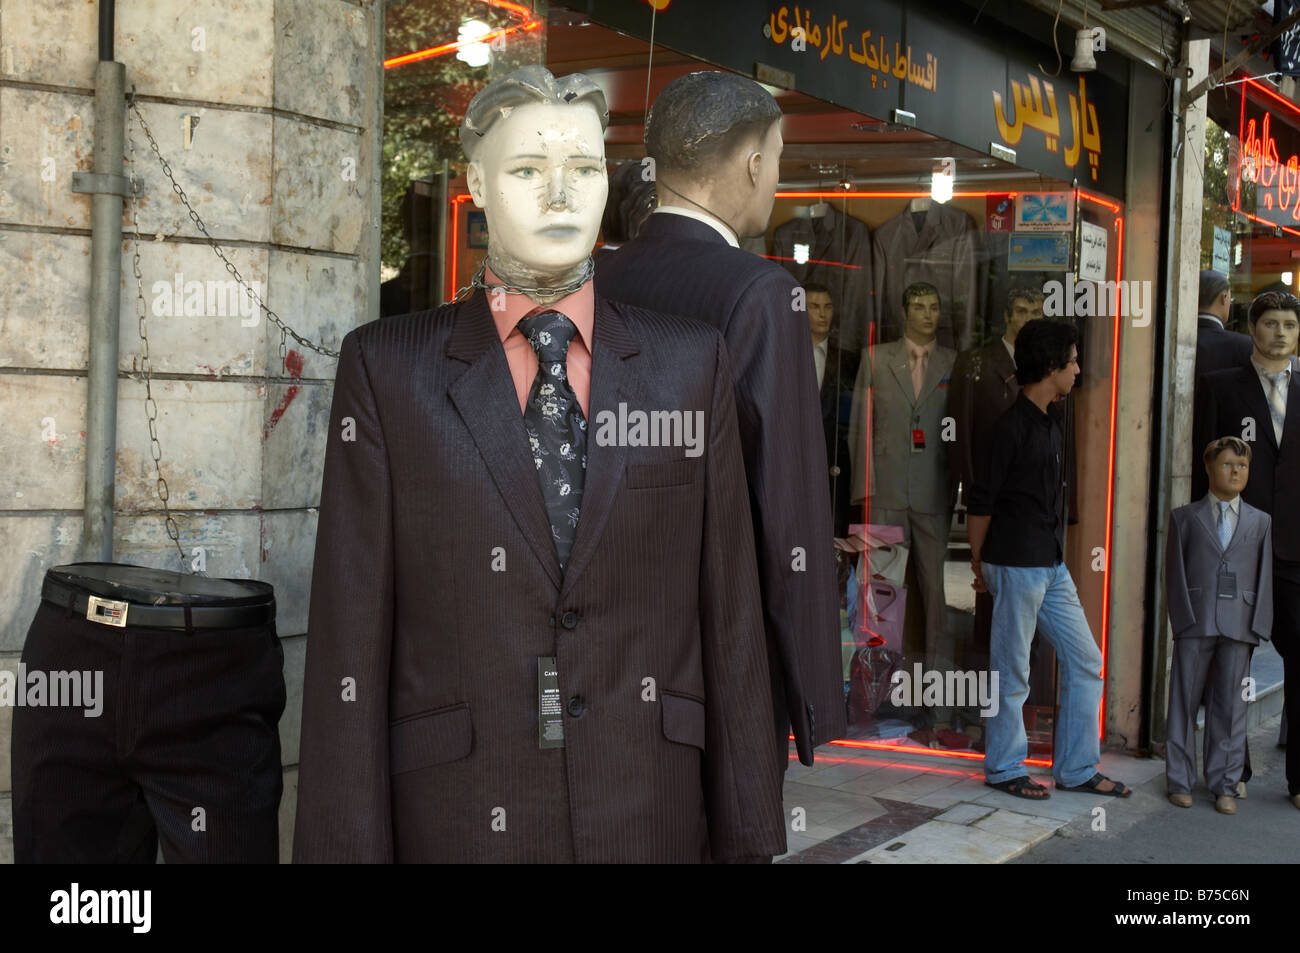 Manikin wearing western suit and tie with a broken nose and damaged head, chained to a pipe outside a shop in Tehran. Stock Photo